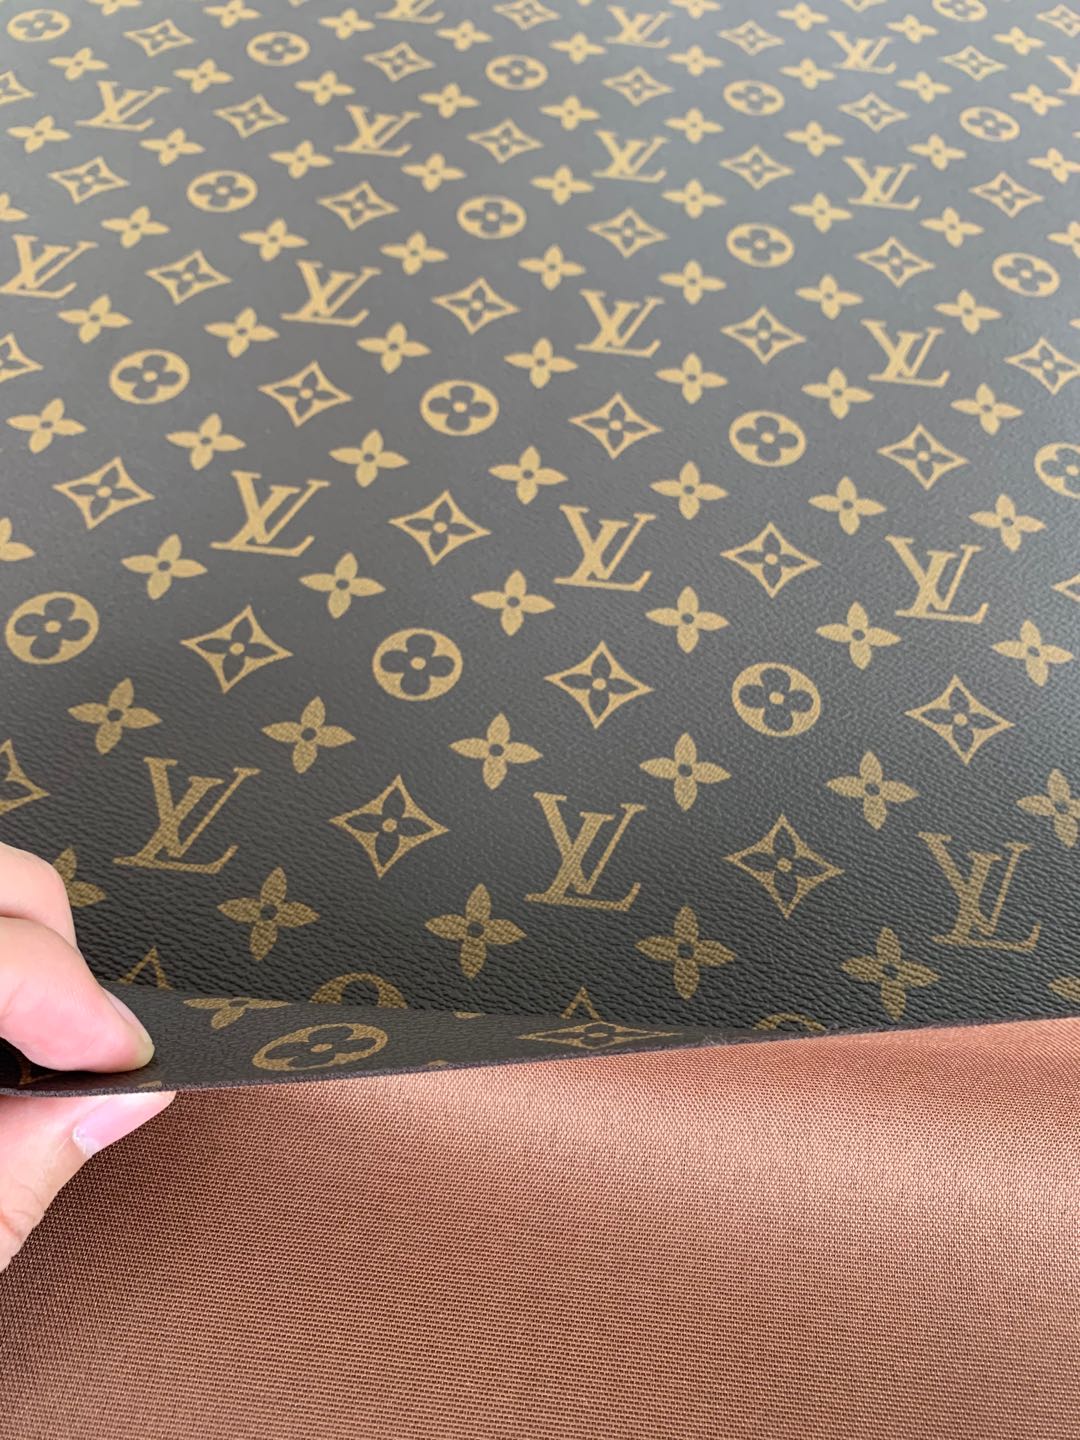 LV Inspired Fabric By the Yard or Half Yard Designer Inspired Fabric LV   Fabric Vinyl fabric Gold pattern